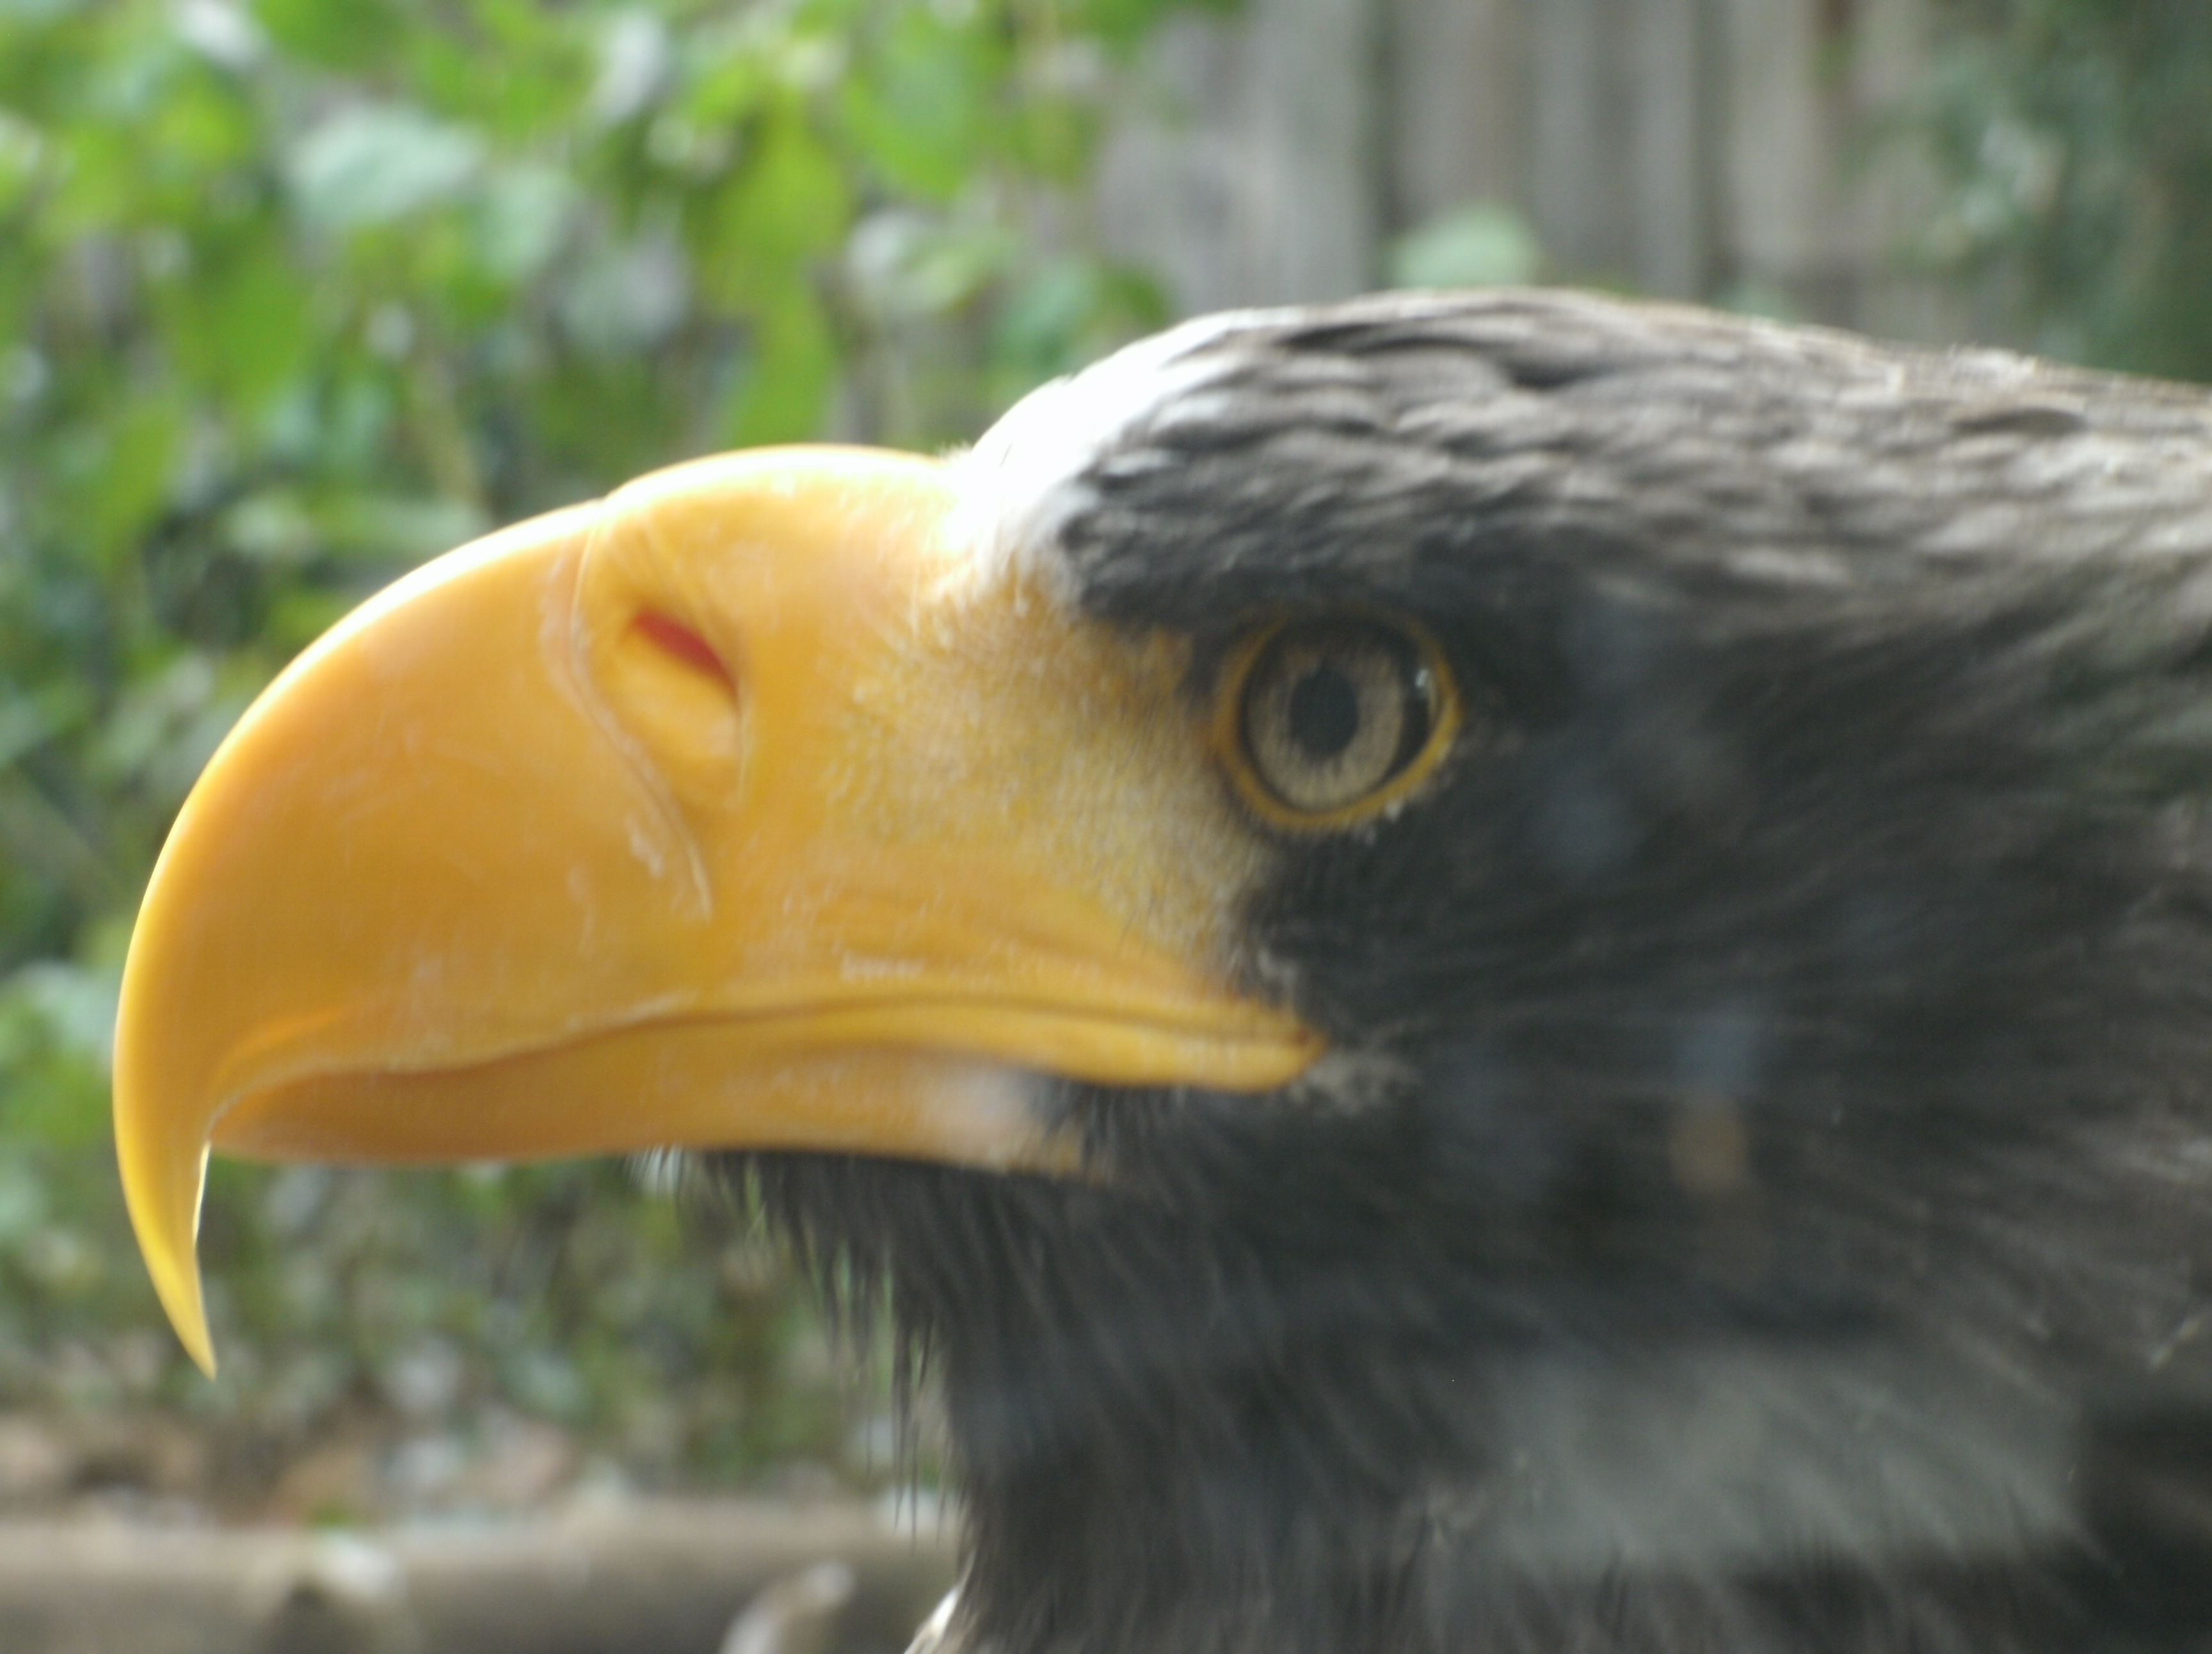 Steller's sea eagle, the largest eagle in the world, as close up as the class saw him at the national Aviary in Pittsburgh.